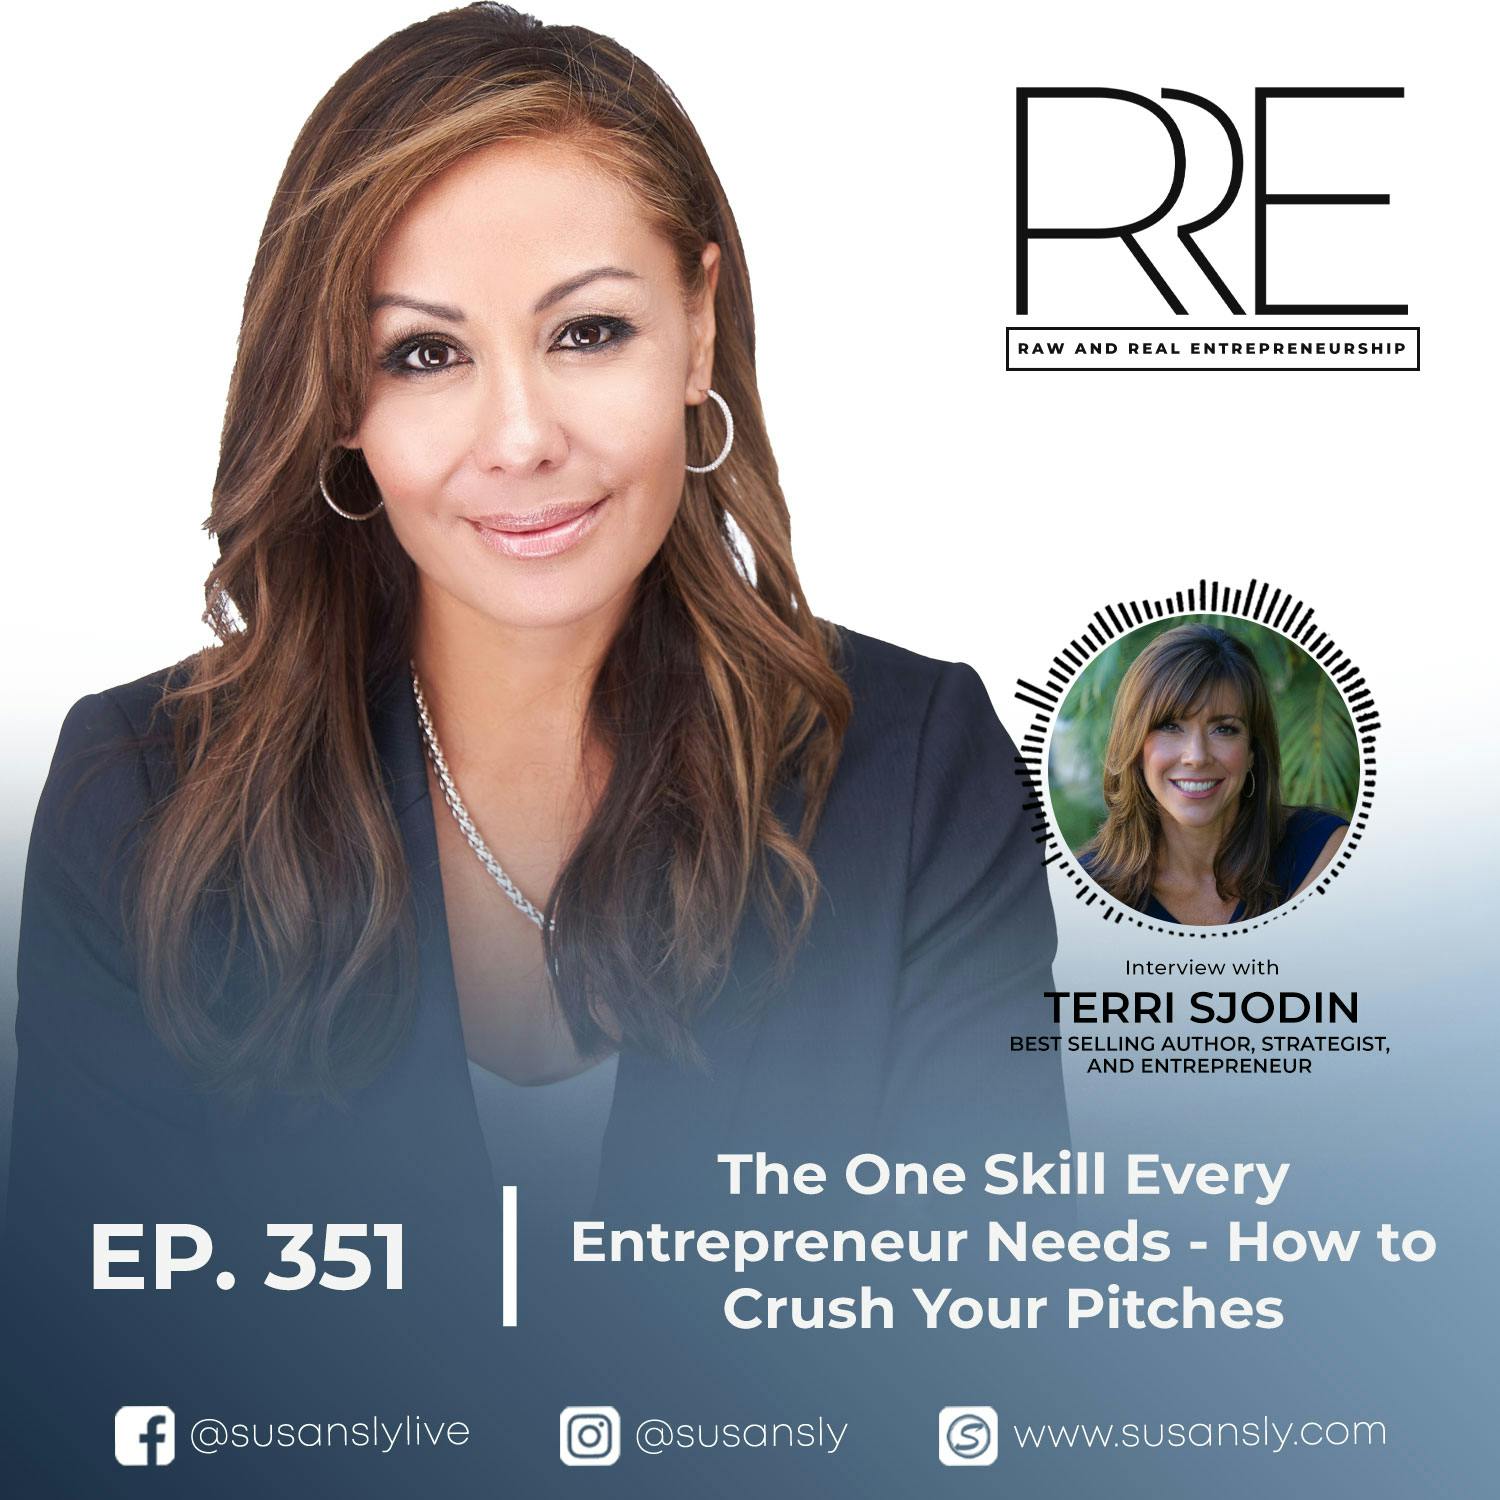 The One Skill Every Entrepreneur Needs - How to Crush Your Pitches with Best Selling Author, Strategist, and Entrepreneur, Terri Sjodin